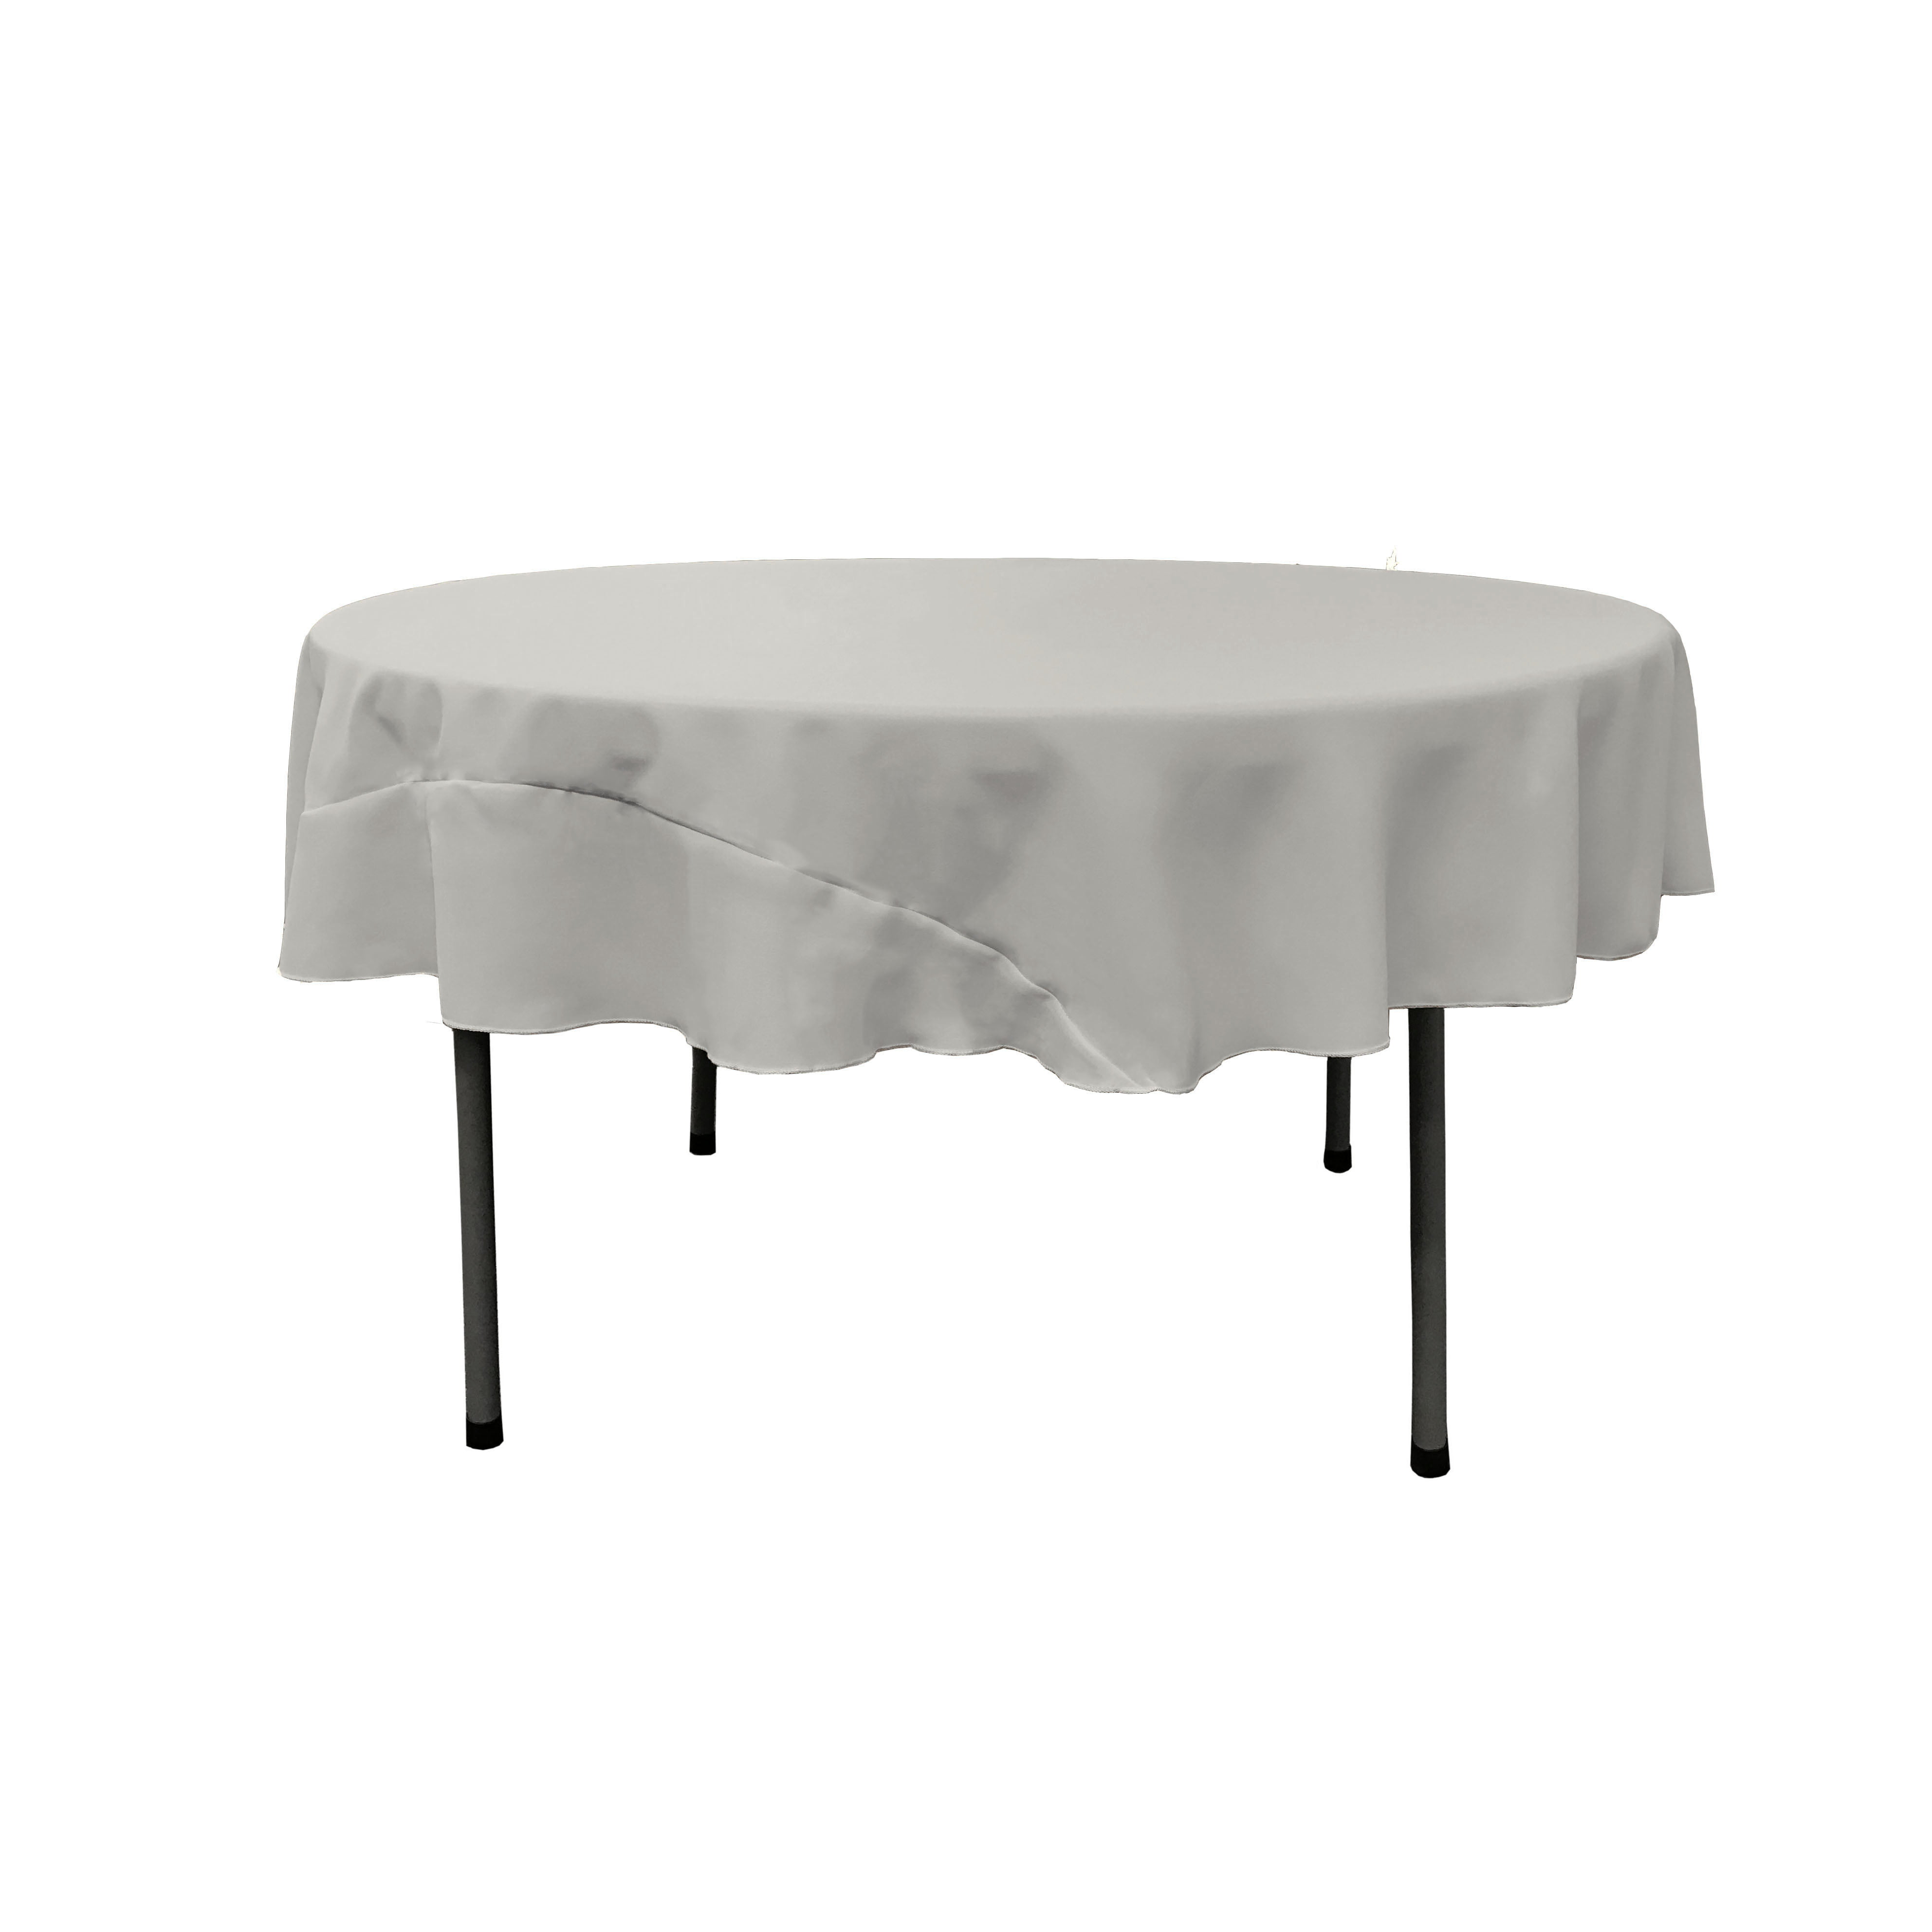 La Linen Polyester Poplin Tablecloth 72, Linens For 72 Inch Round Table